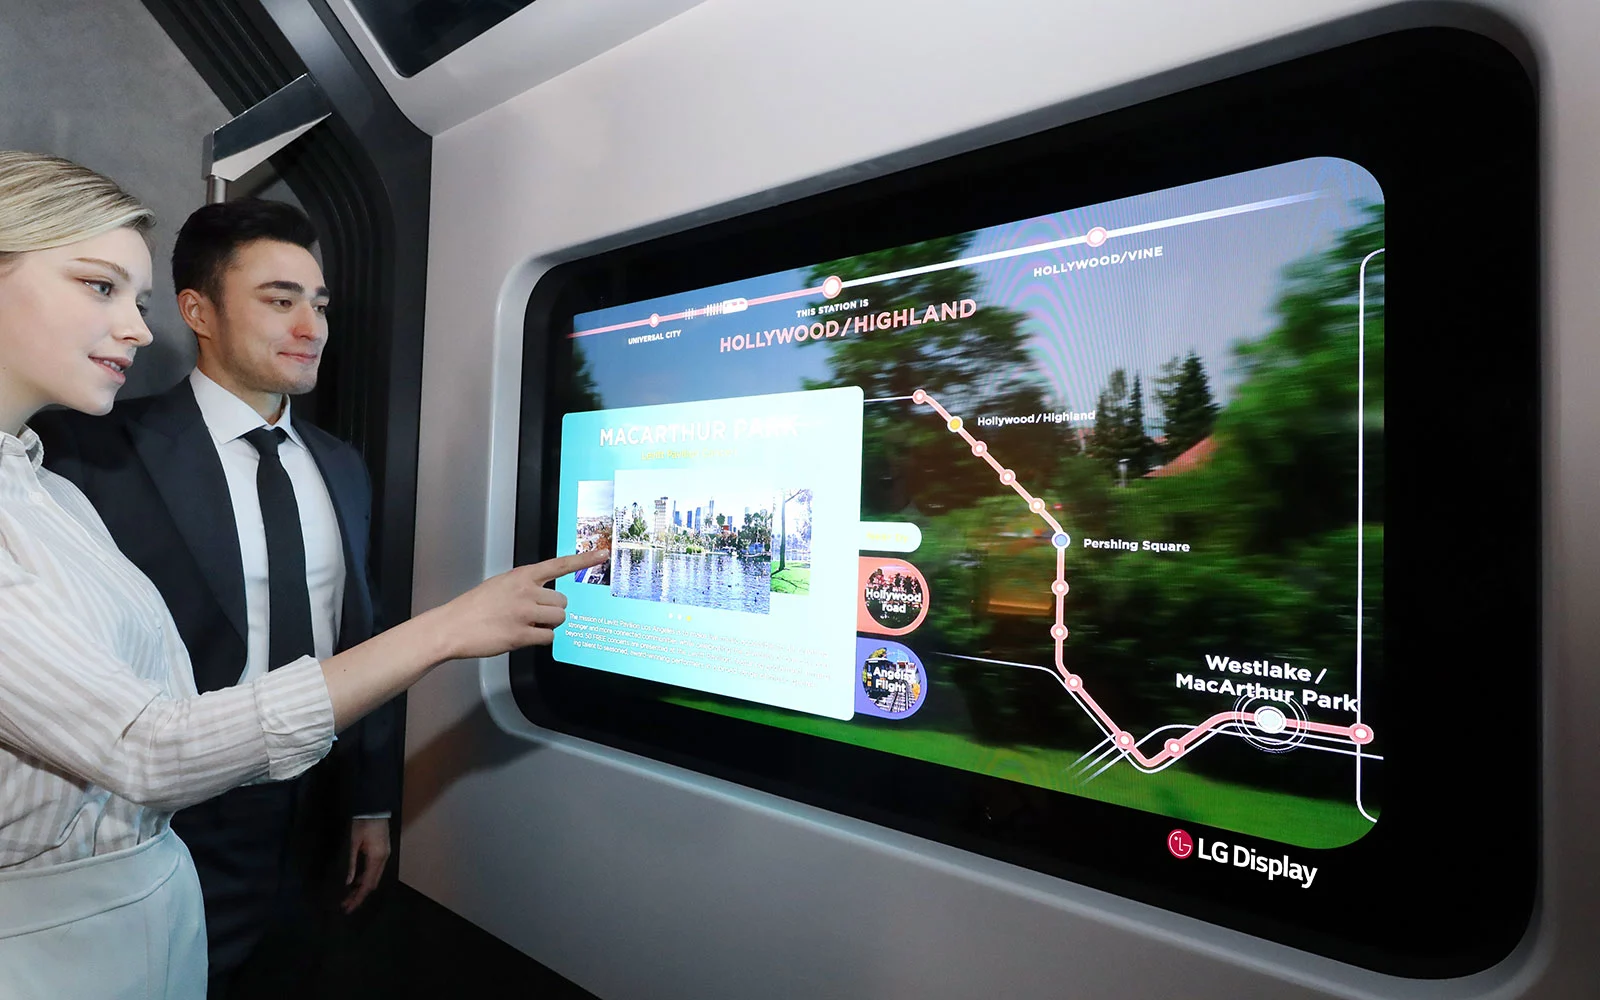 LG Display will additionally demonstrate how the company’s 55-inch Transparent OLED display can be applied to a subway train in a Metro Zone. While on board a virtual train carriage, passengers may look outside through the transparent display that has replaced a traditional window. Its high transparency enabled by OLED means passengers can still enjoy the passing scenery while viewing clear information such as subway line maps, weather information, and other news.